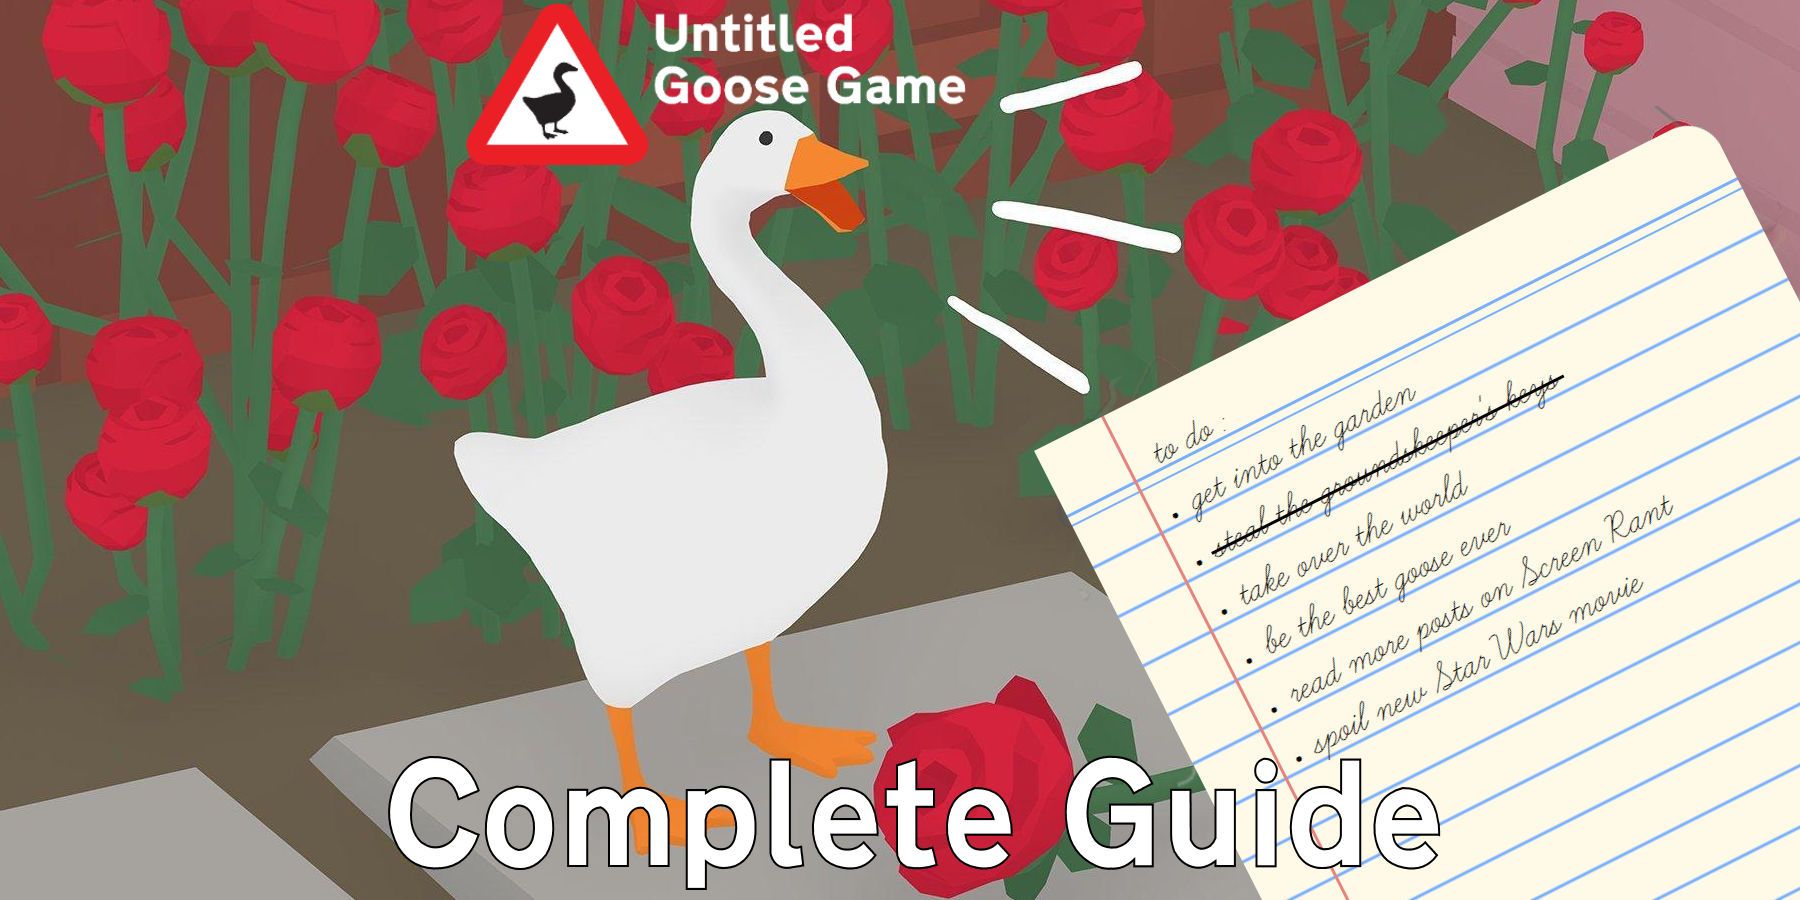 Untitled Goose Game Guide